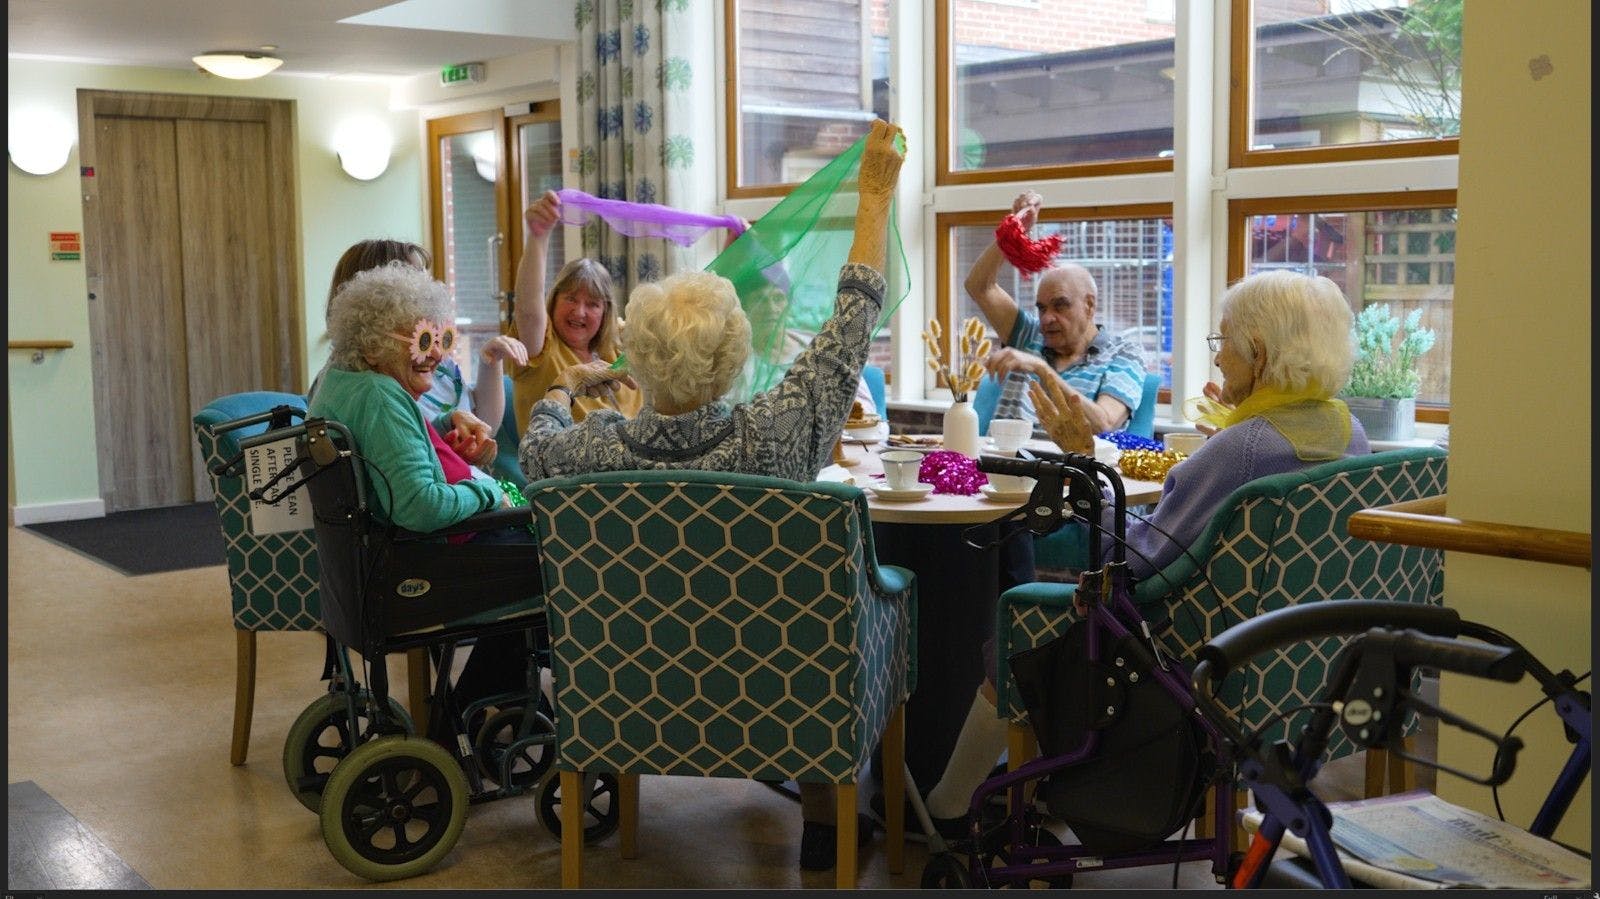 Shaw Healthcare - Mill River Lodge care home 007